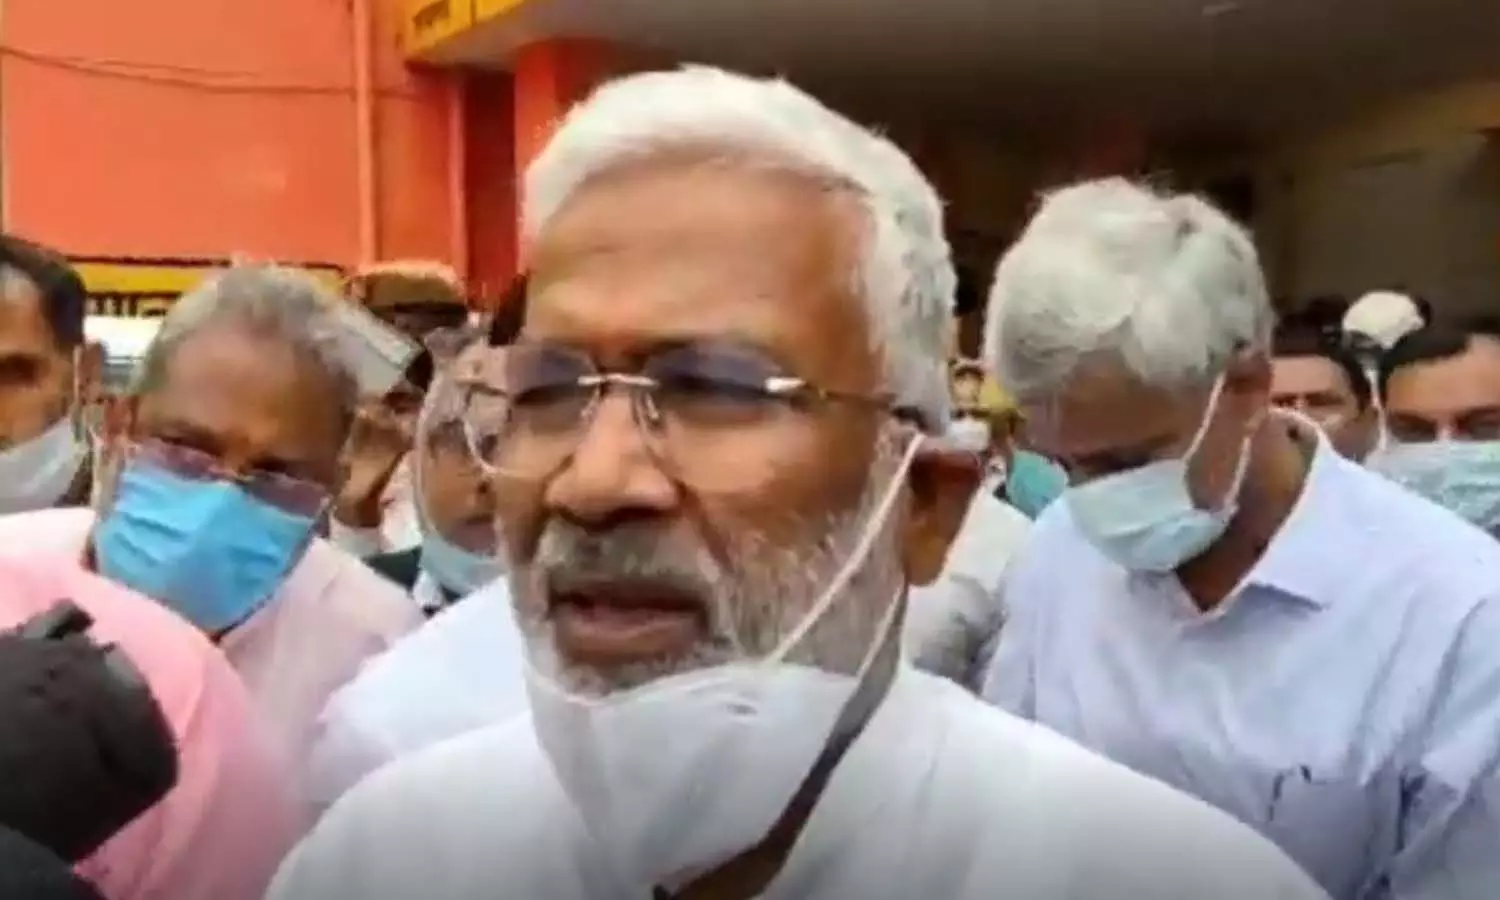 Cabinet Minister Swatantra Dev Singh inspected the district hospital in Moradabad, asked the patients condition